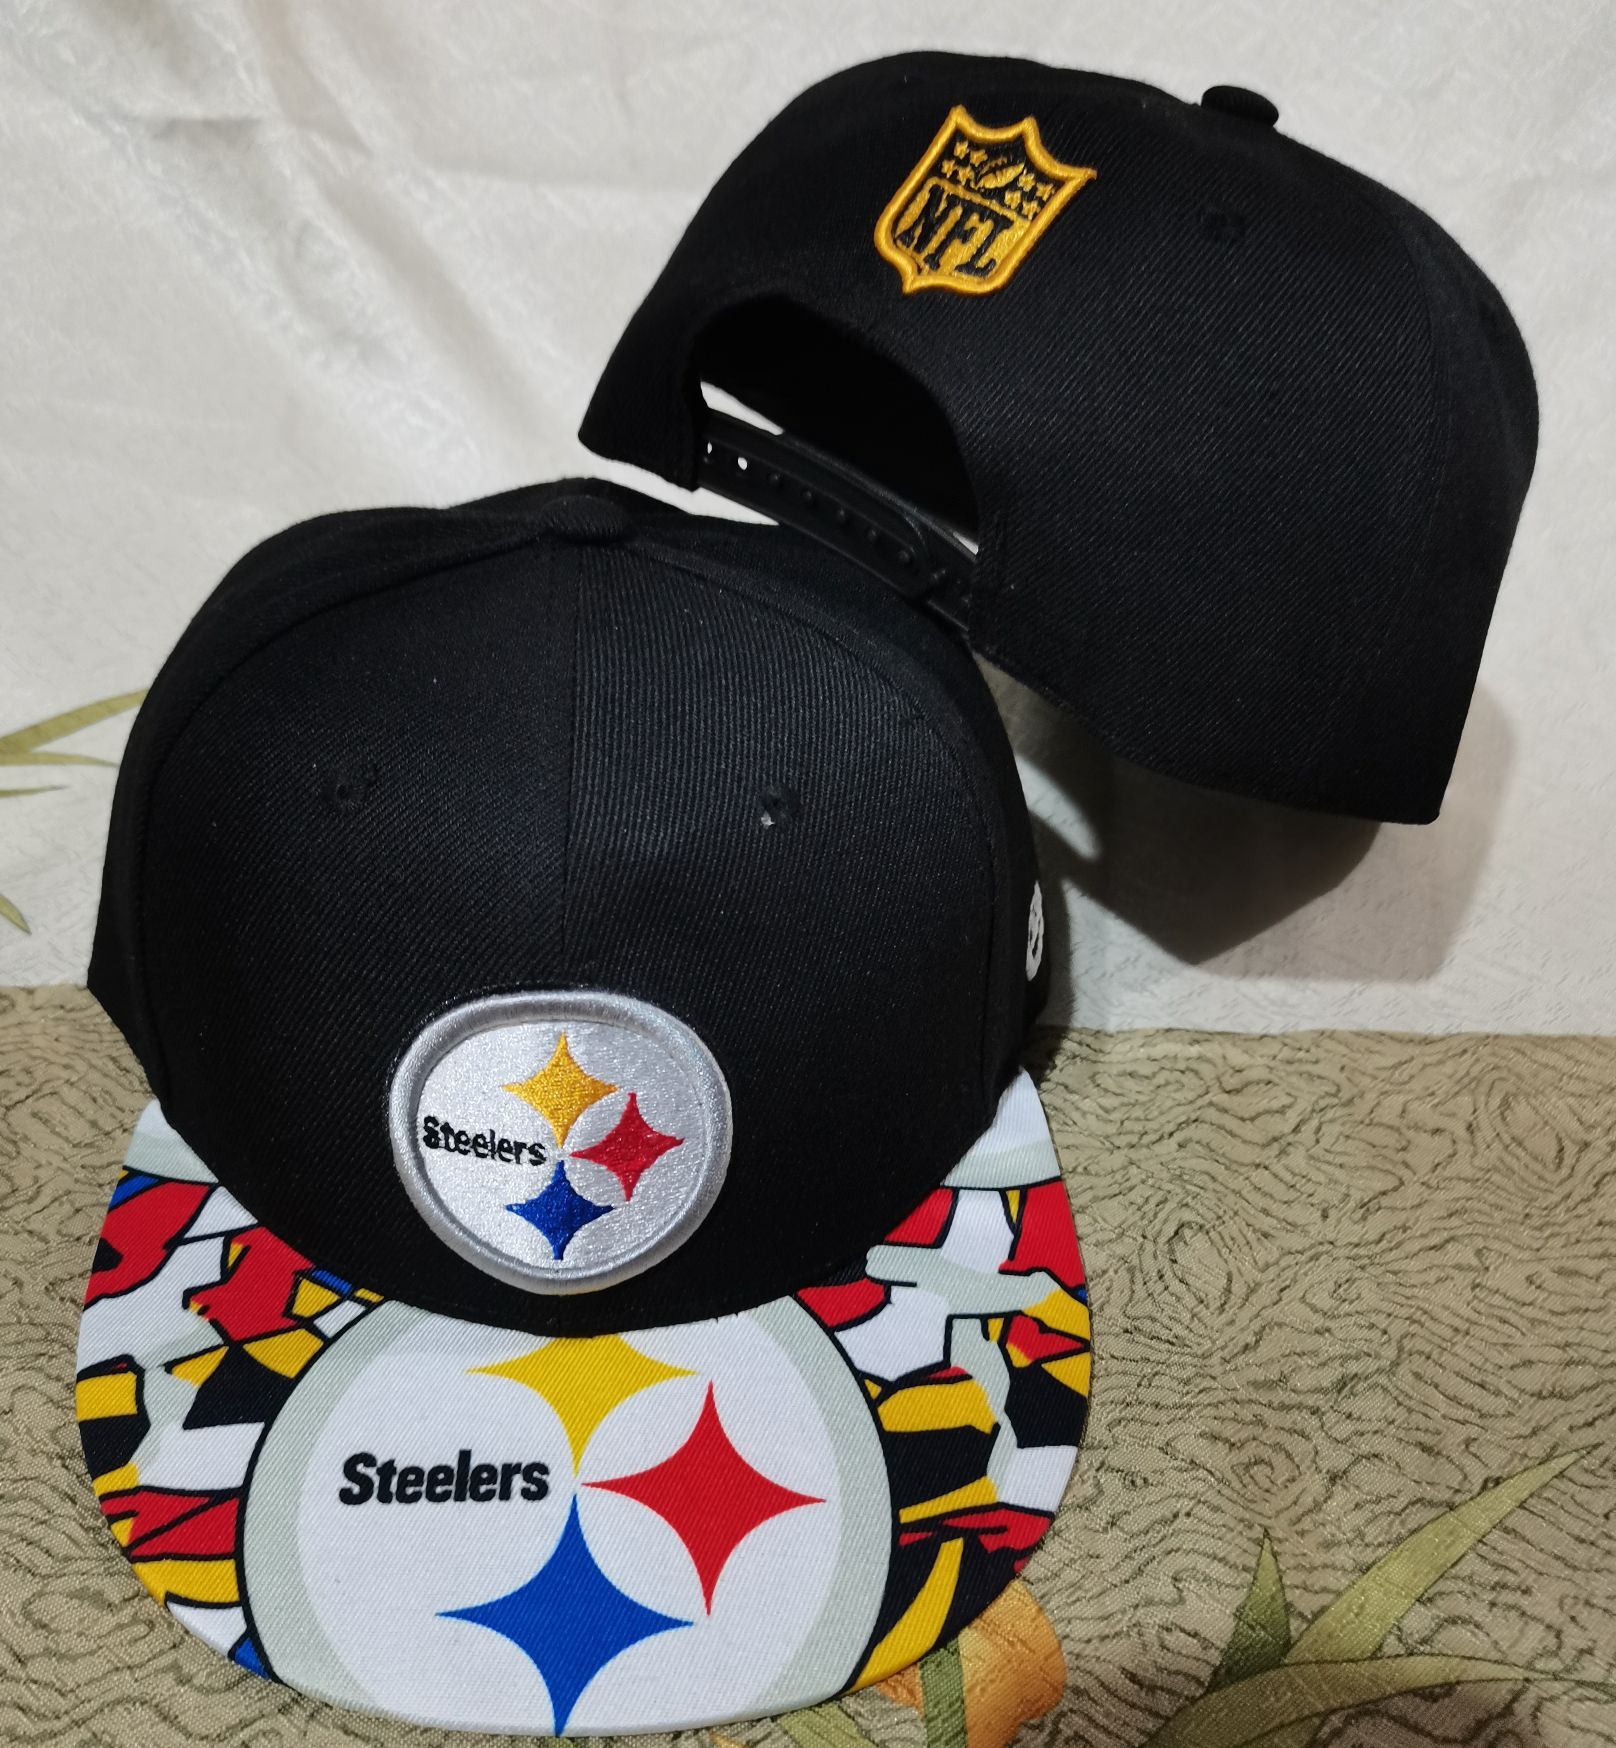 2022 NFL Pittsburgh Steelers #1 hat GSMY->nfl hats->Sports Caps